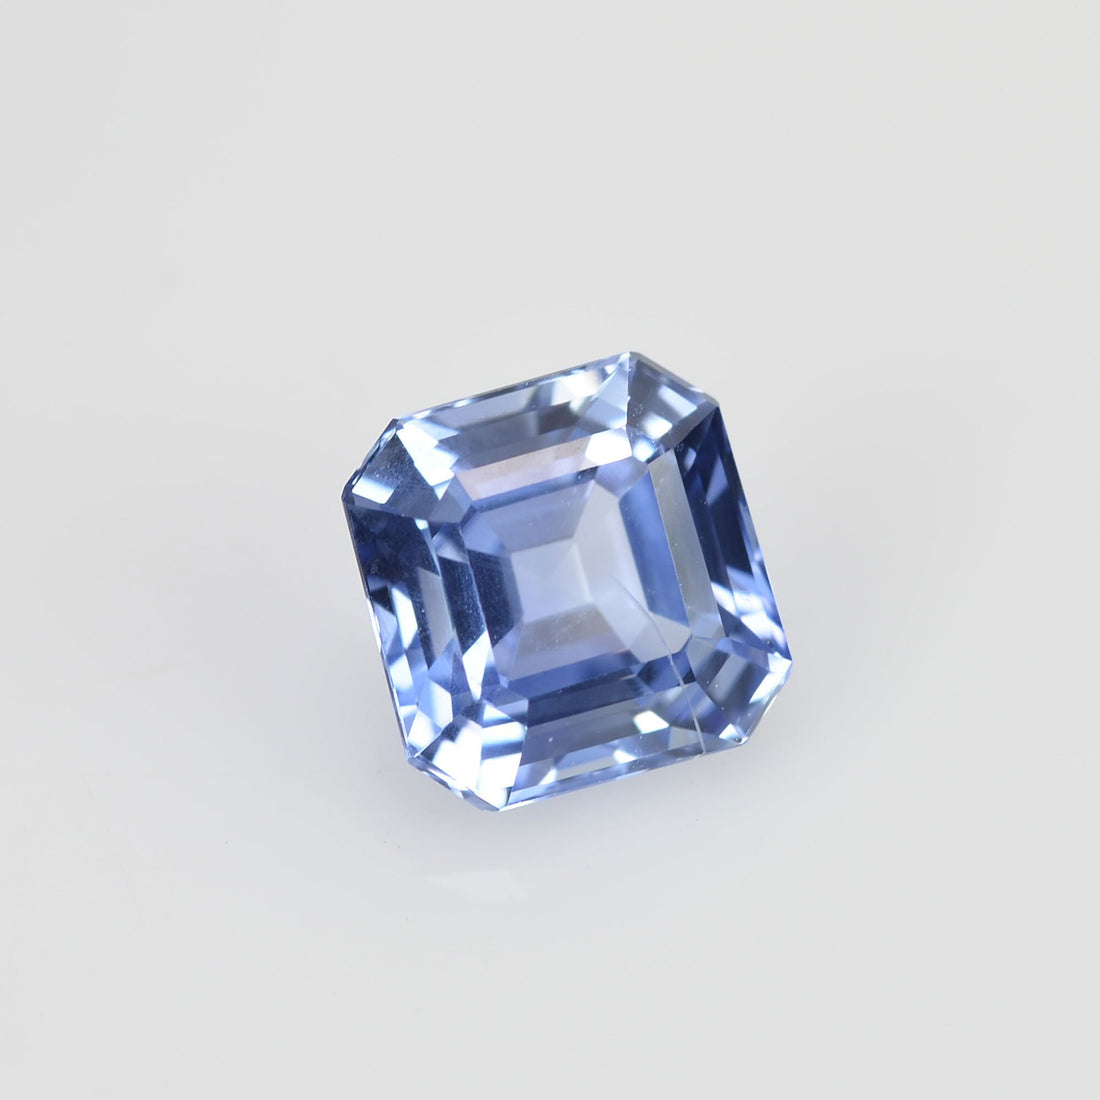 1.95 cts Unheated Natural Blue Sapphire Loose Gemstone Octagon Cut